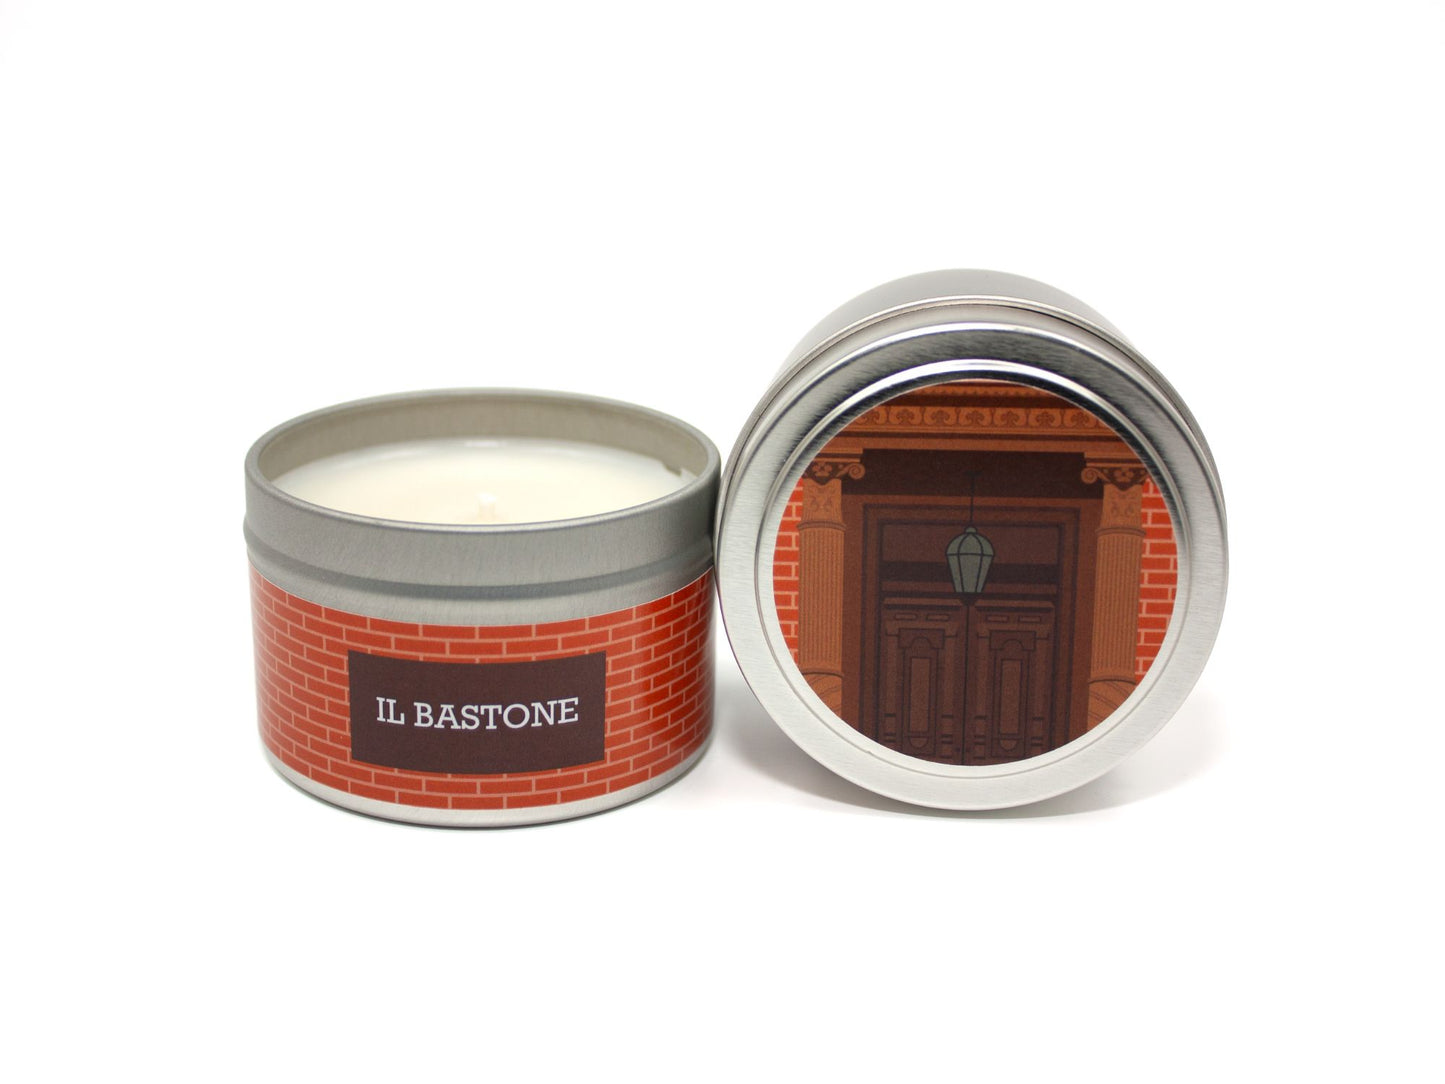 Onset & Rime apothocary scented candle called "Il Bastone" in a 4 oz silver tin. The circular label on top shows a detailed wood front door on a red brick house. The text on the front label is "Il Bastone - Orange Blossom, Verbena, Palo Santo, Cedar".